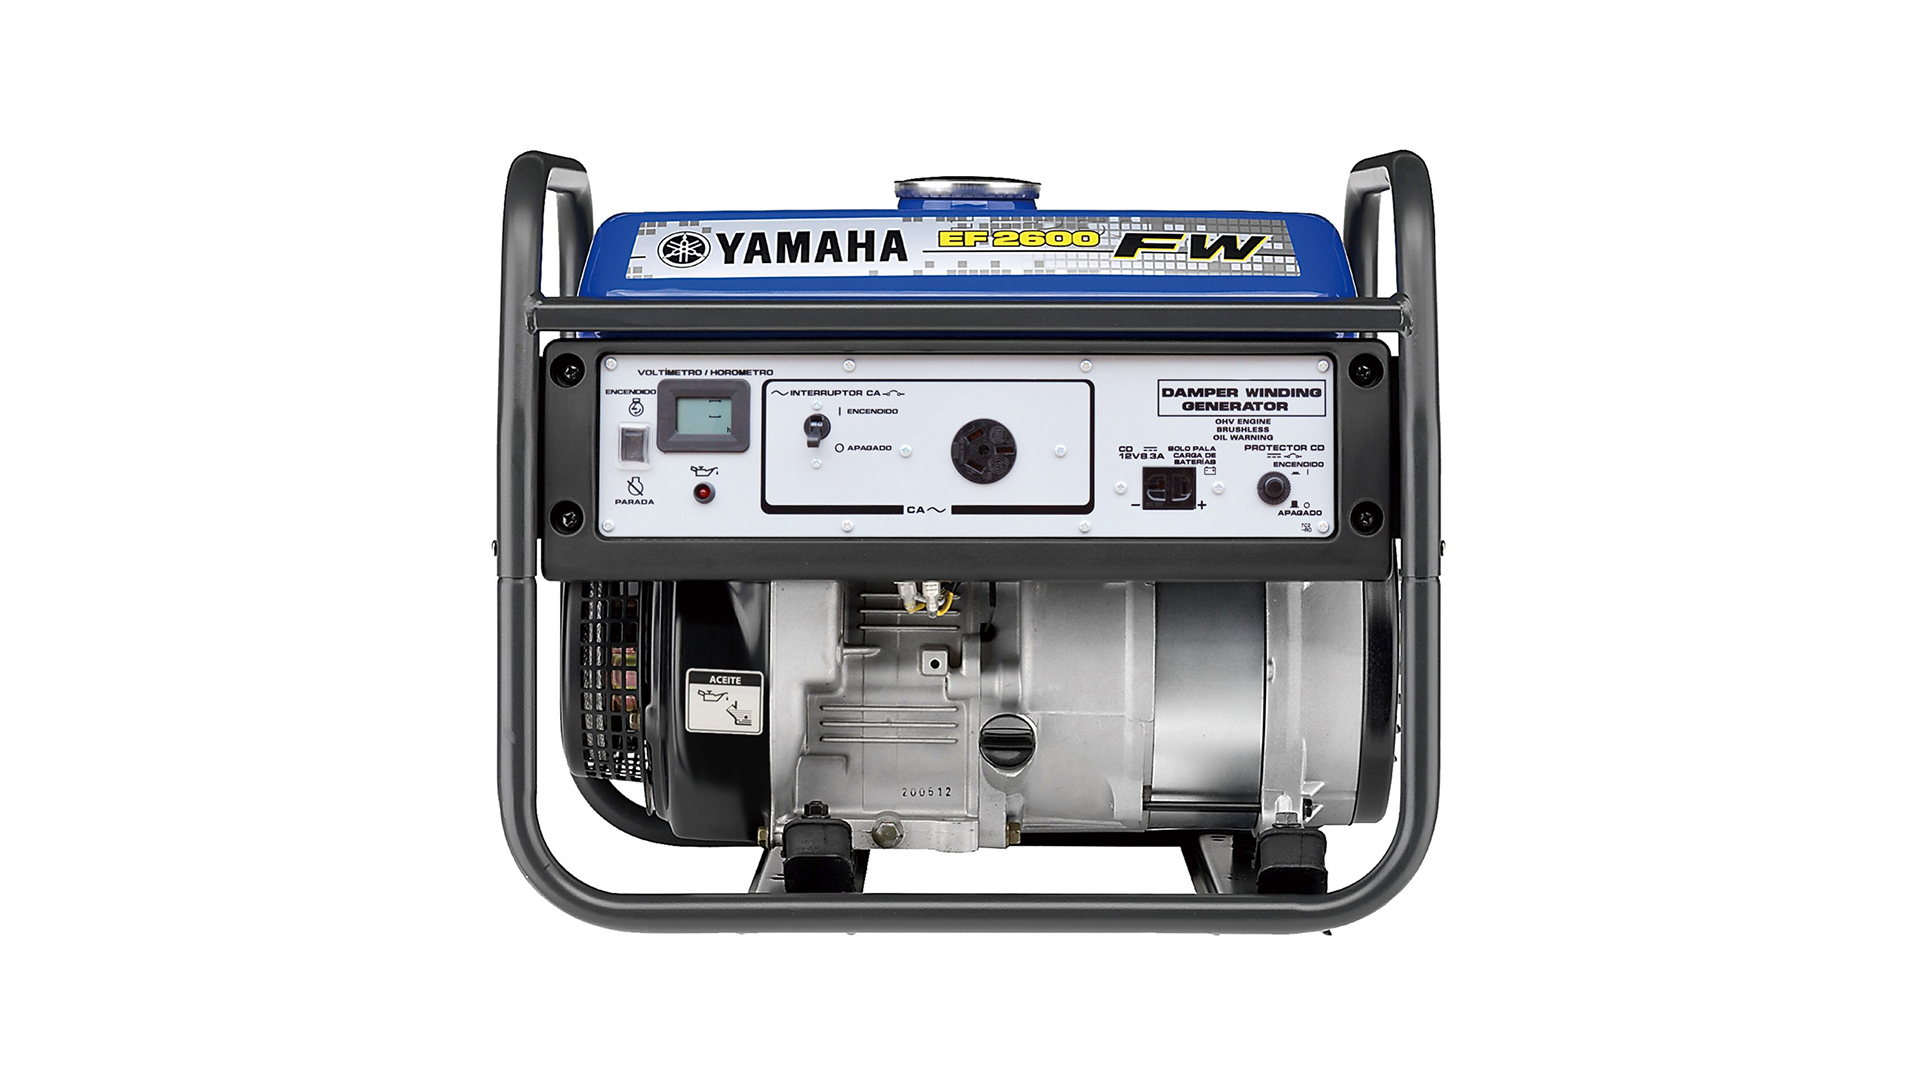 YAMAHA EF2600FW GENERATOR  - GET MORE POWER:
A brush-less, maximum rated 2.3Kva generator with Damper winding adopted for greatly reduced waveform distortion ratio.